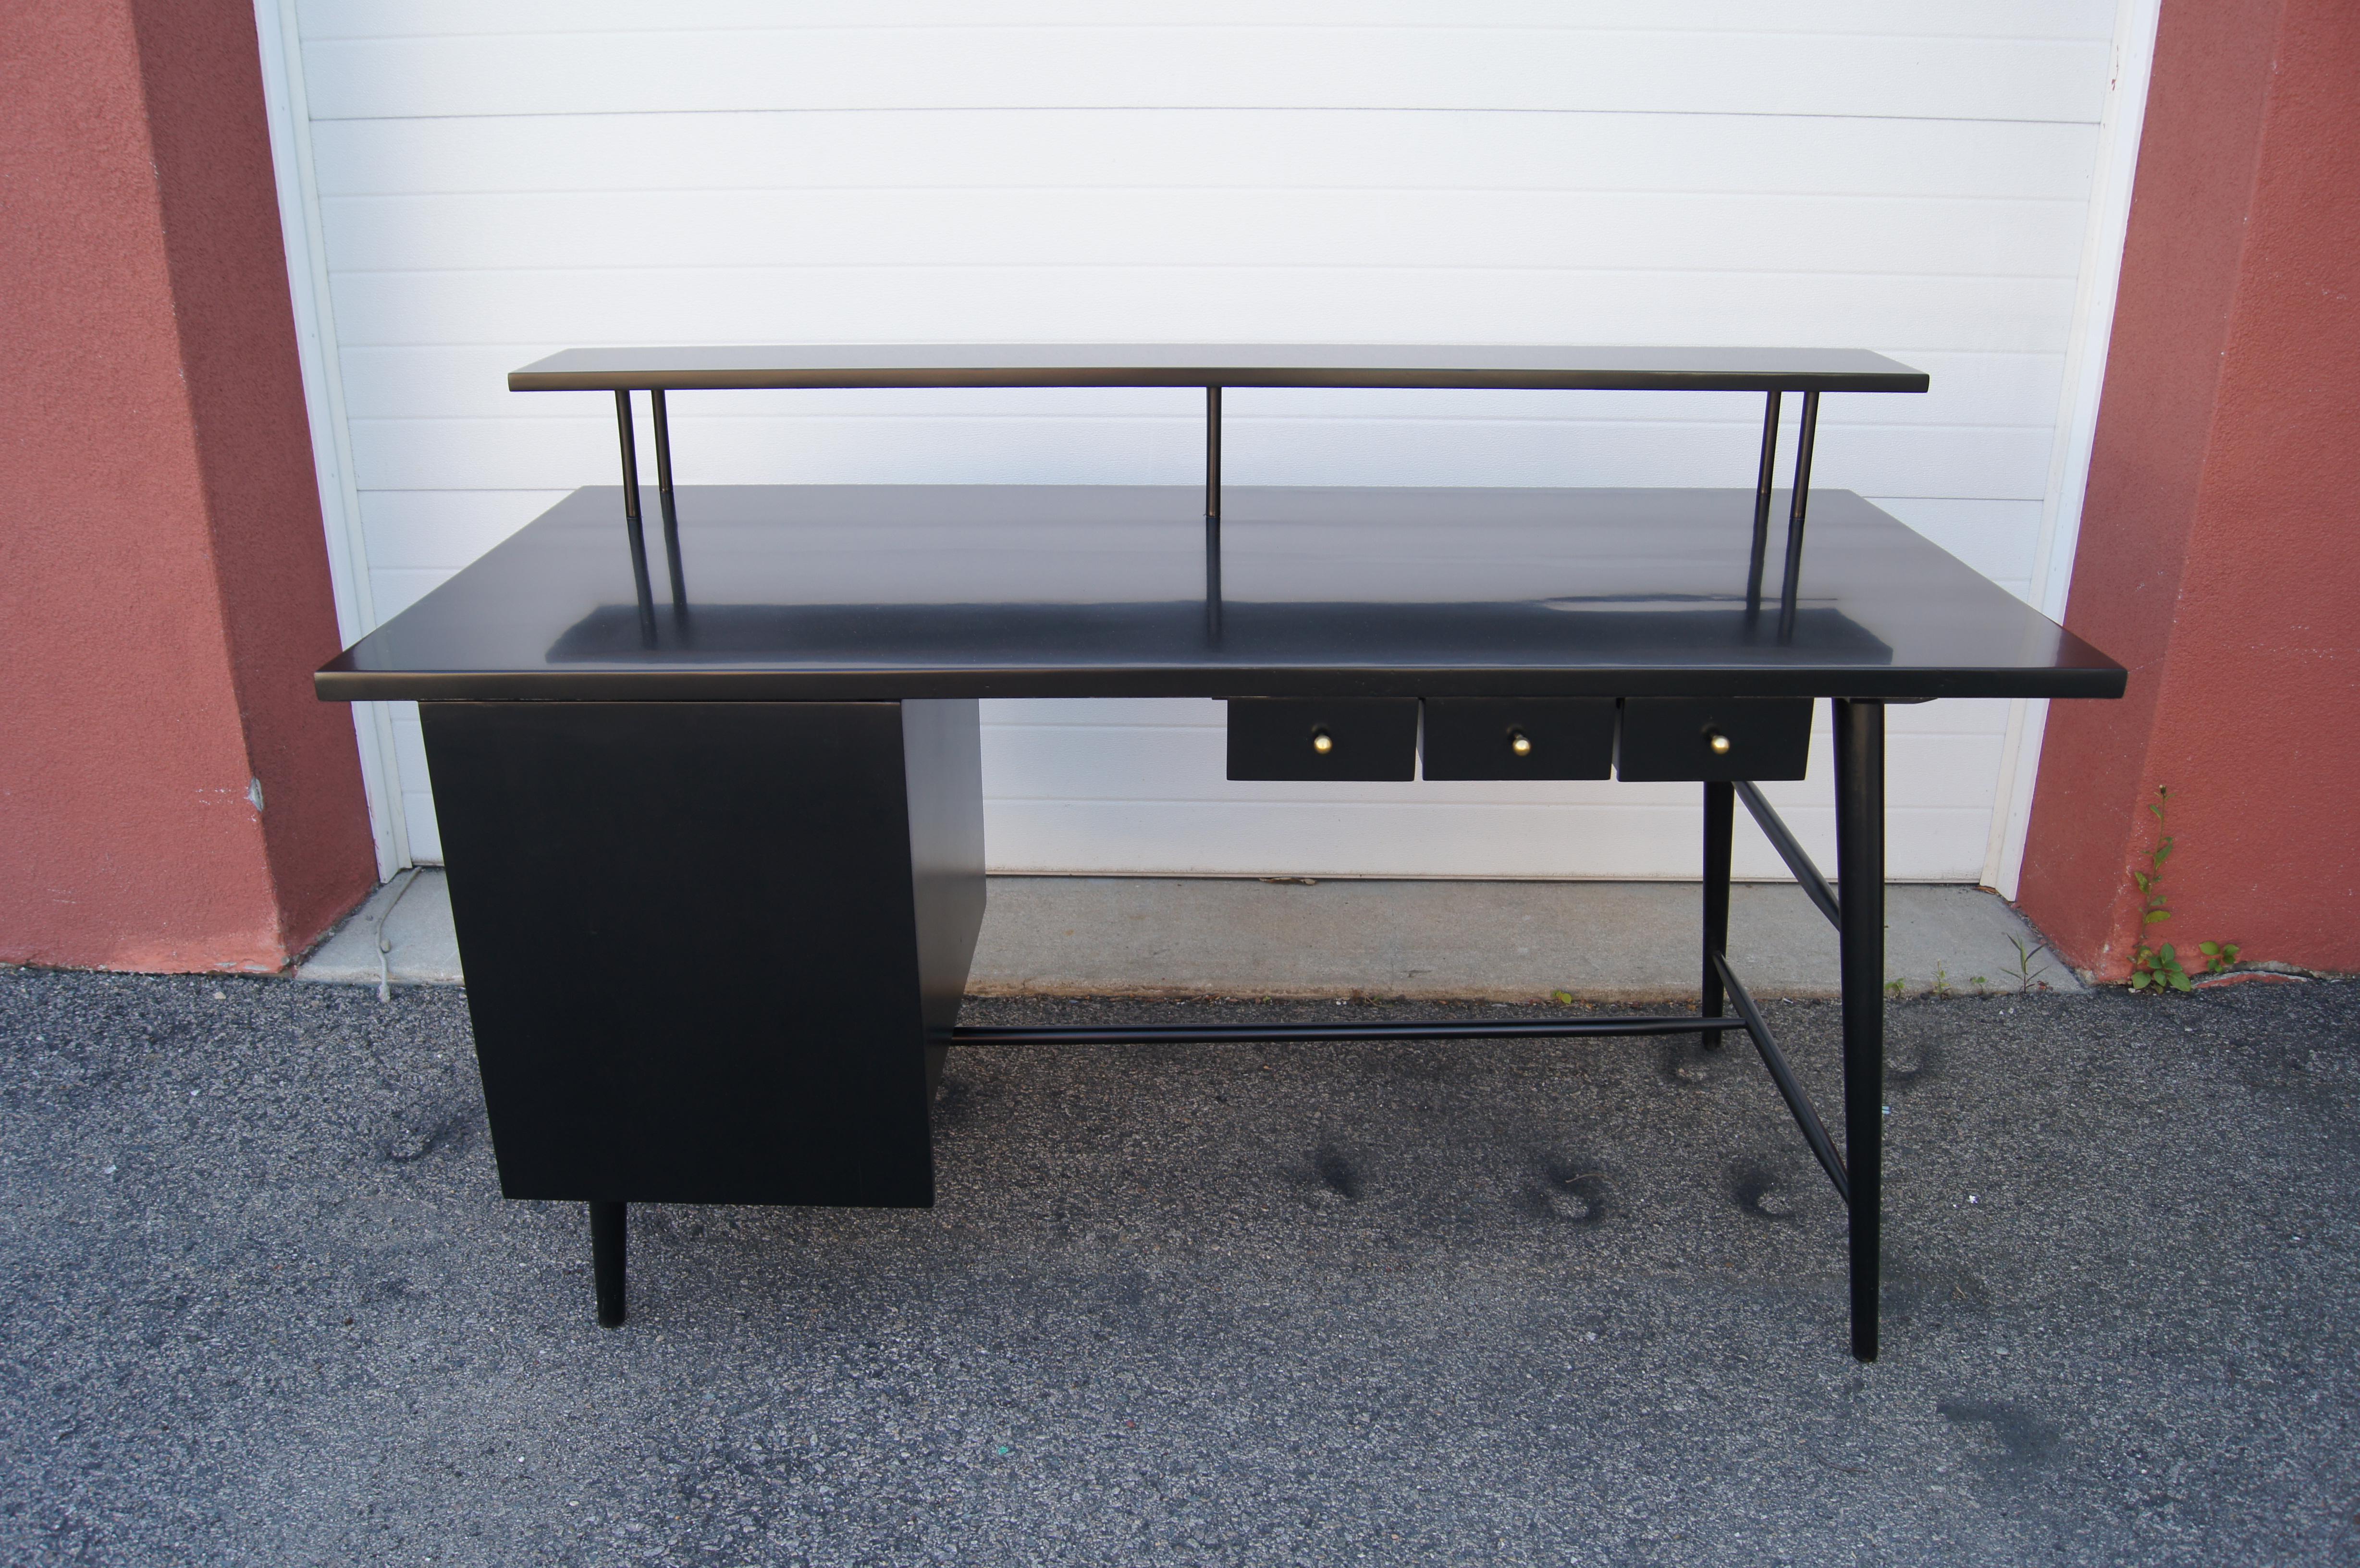 This hard-to-find desk is a Paul McCobb design for his Predictor series, manufactured by O'Hearn Furniture only from 1951 to 1955. The ebonized maple case sits on slender canted legs. To the left a door conceals three drawers, the lower of which is